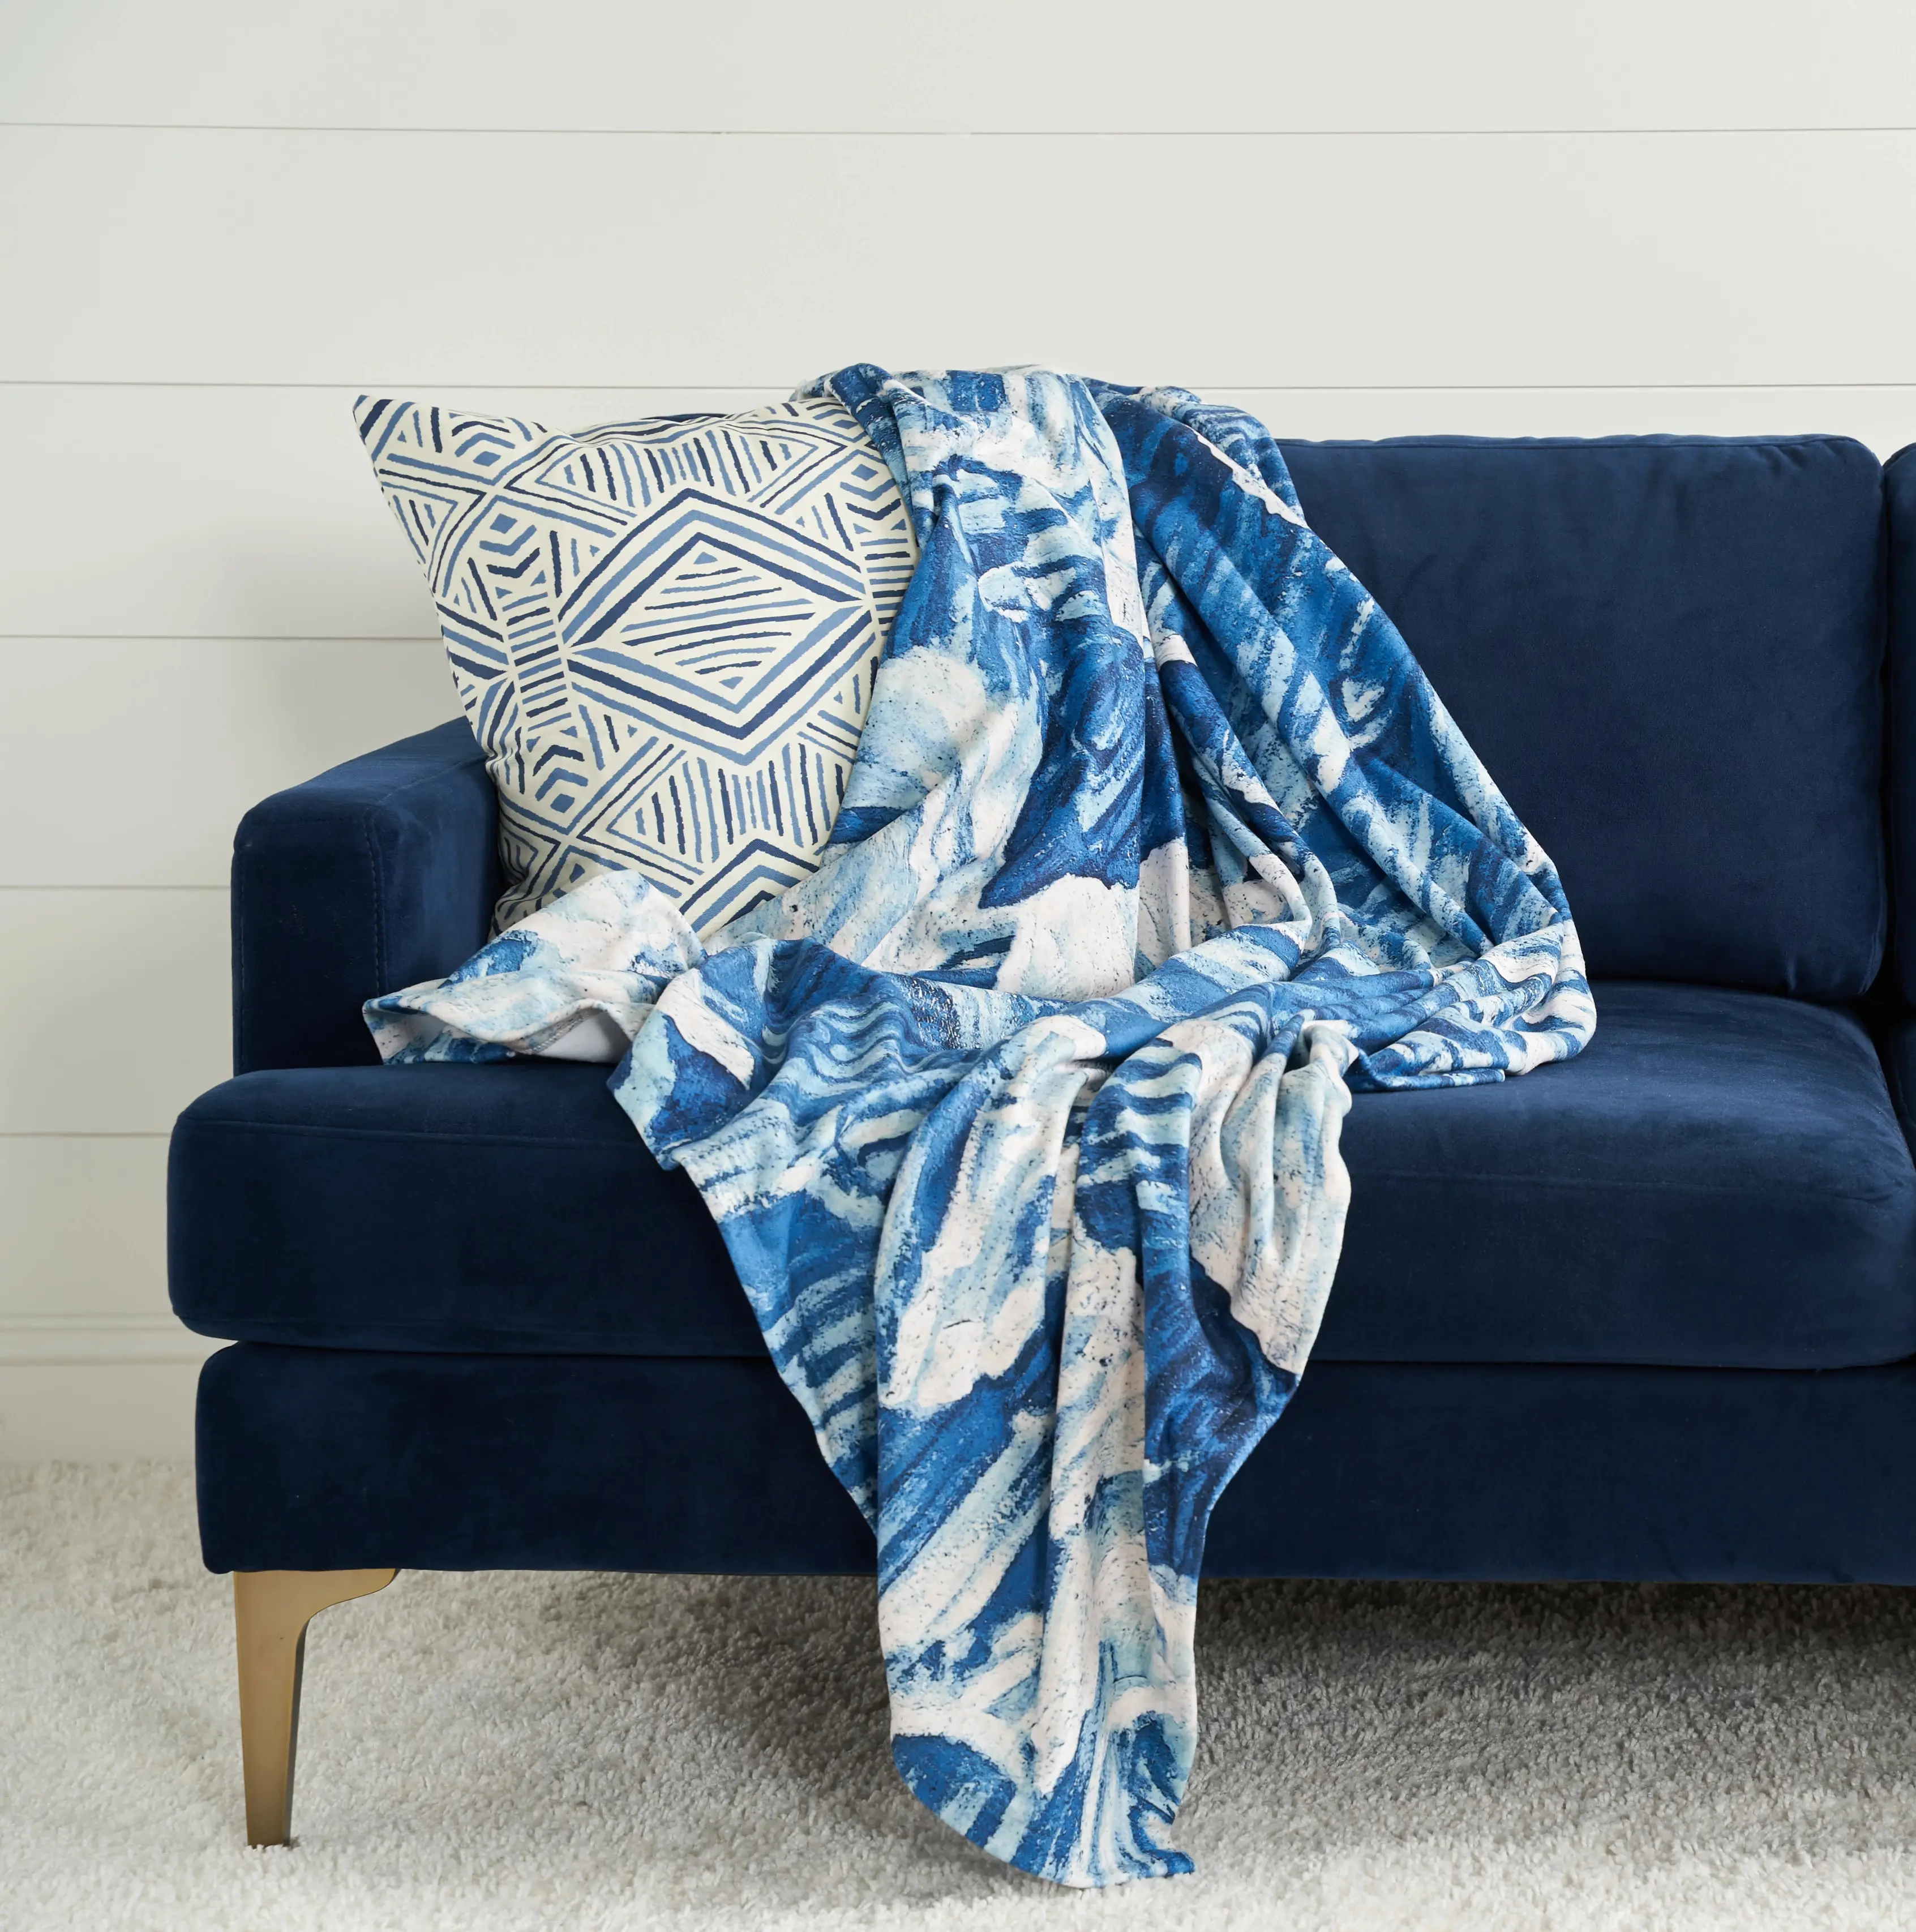 Blue throw blanket and pillow on couch